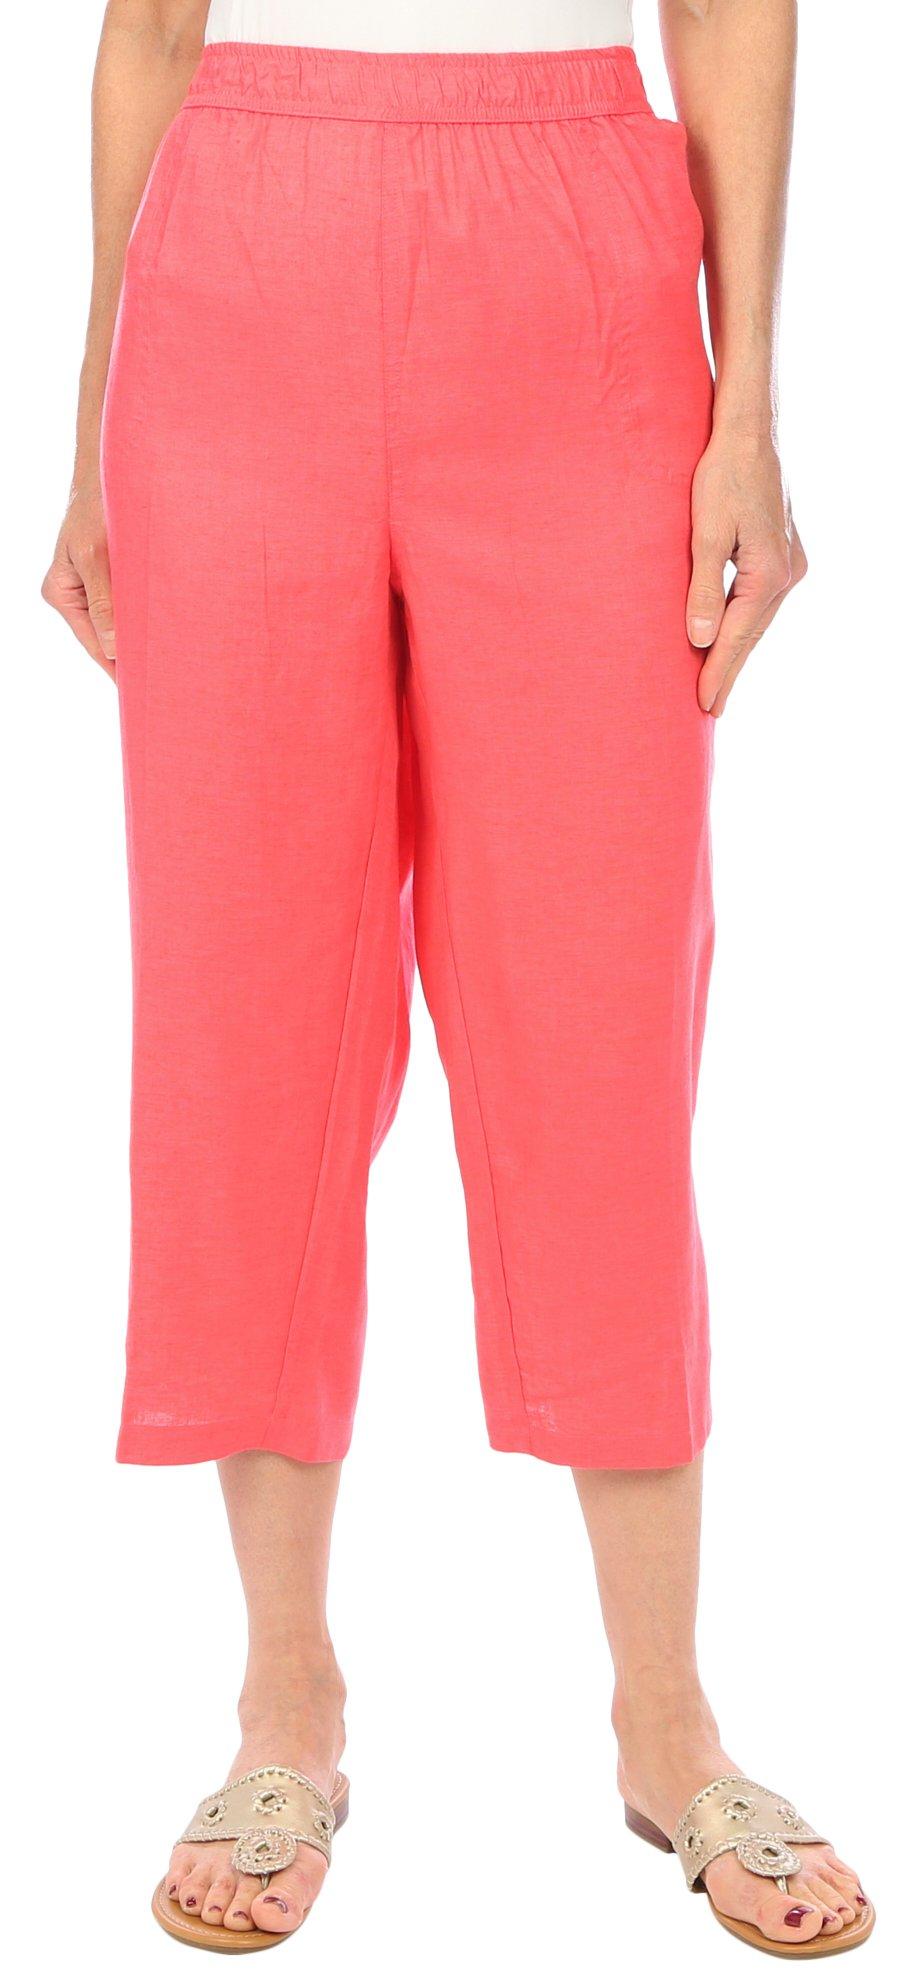 Coral Bay Womens 22 in. Solid Linen Capris